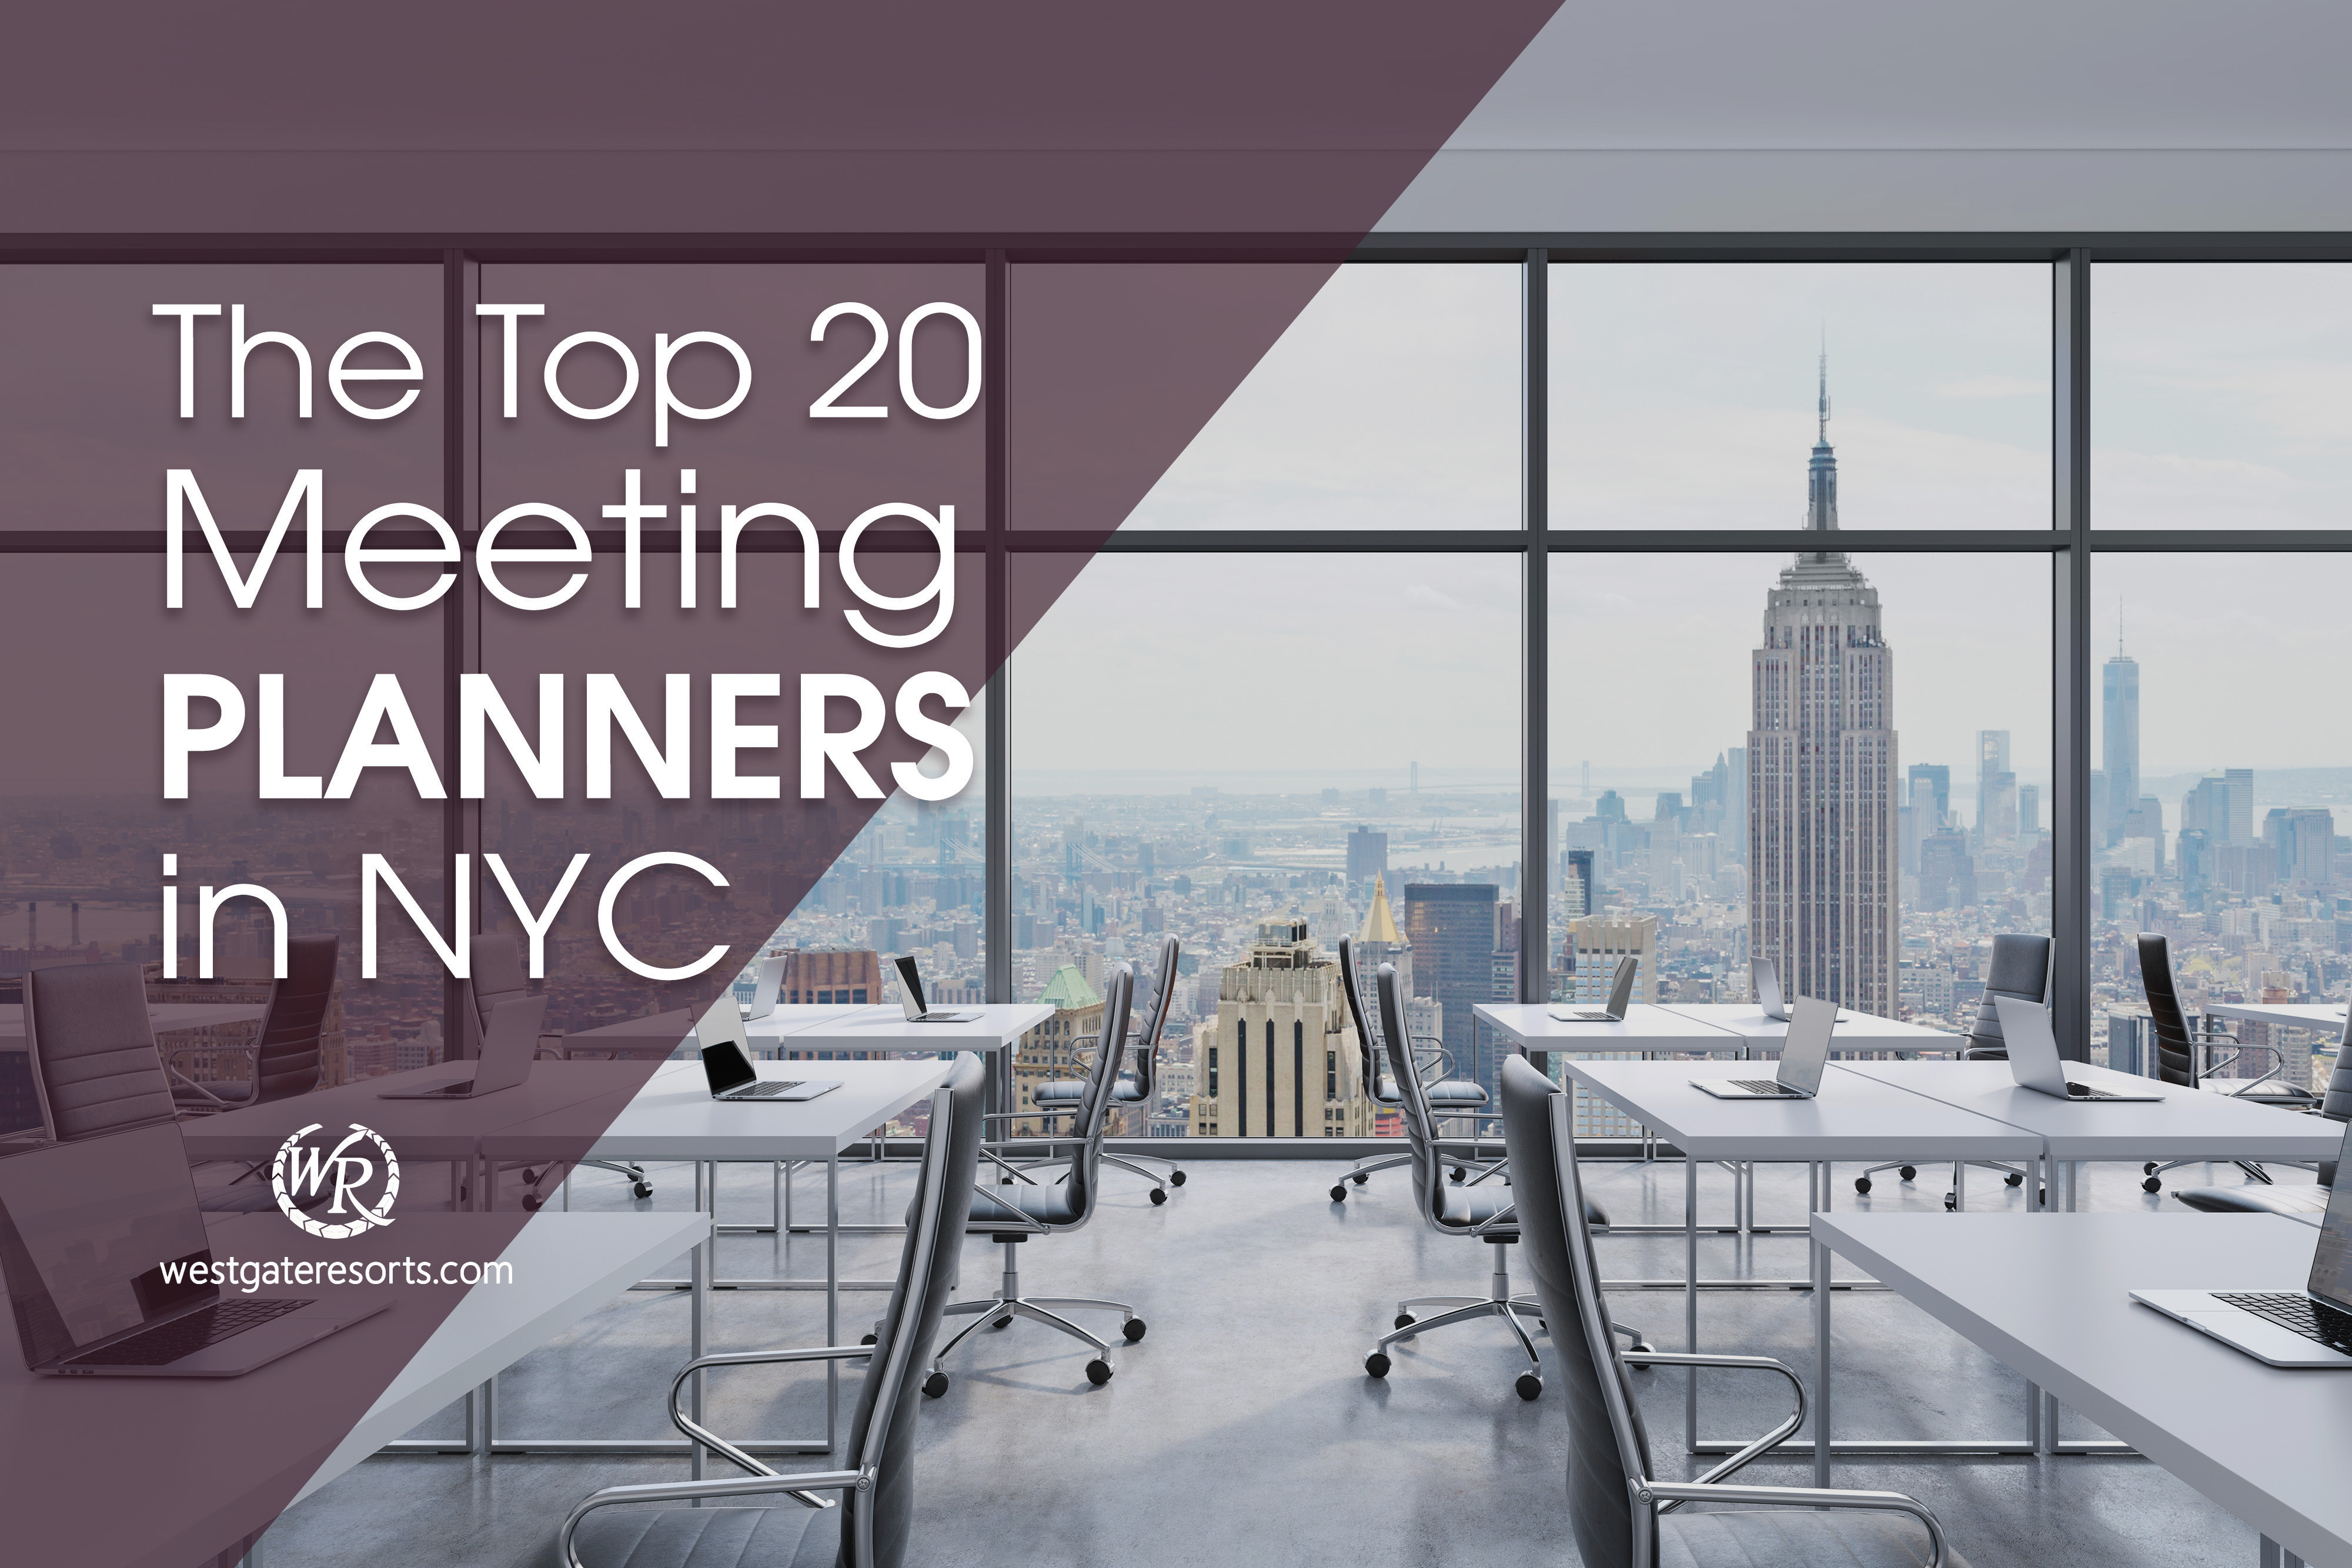 The Top 20 Meeting Planners in NYC (UPDATED 2021)